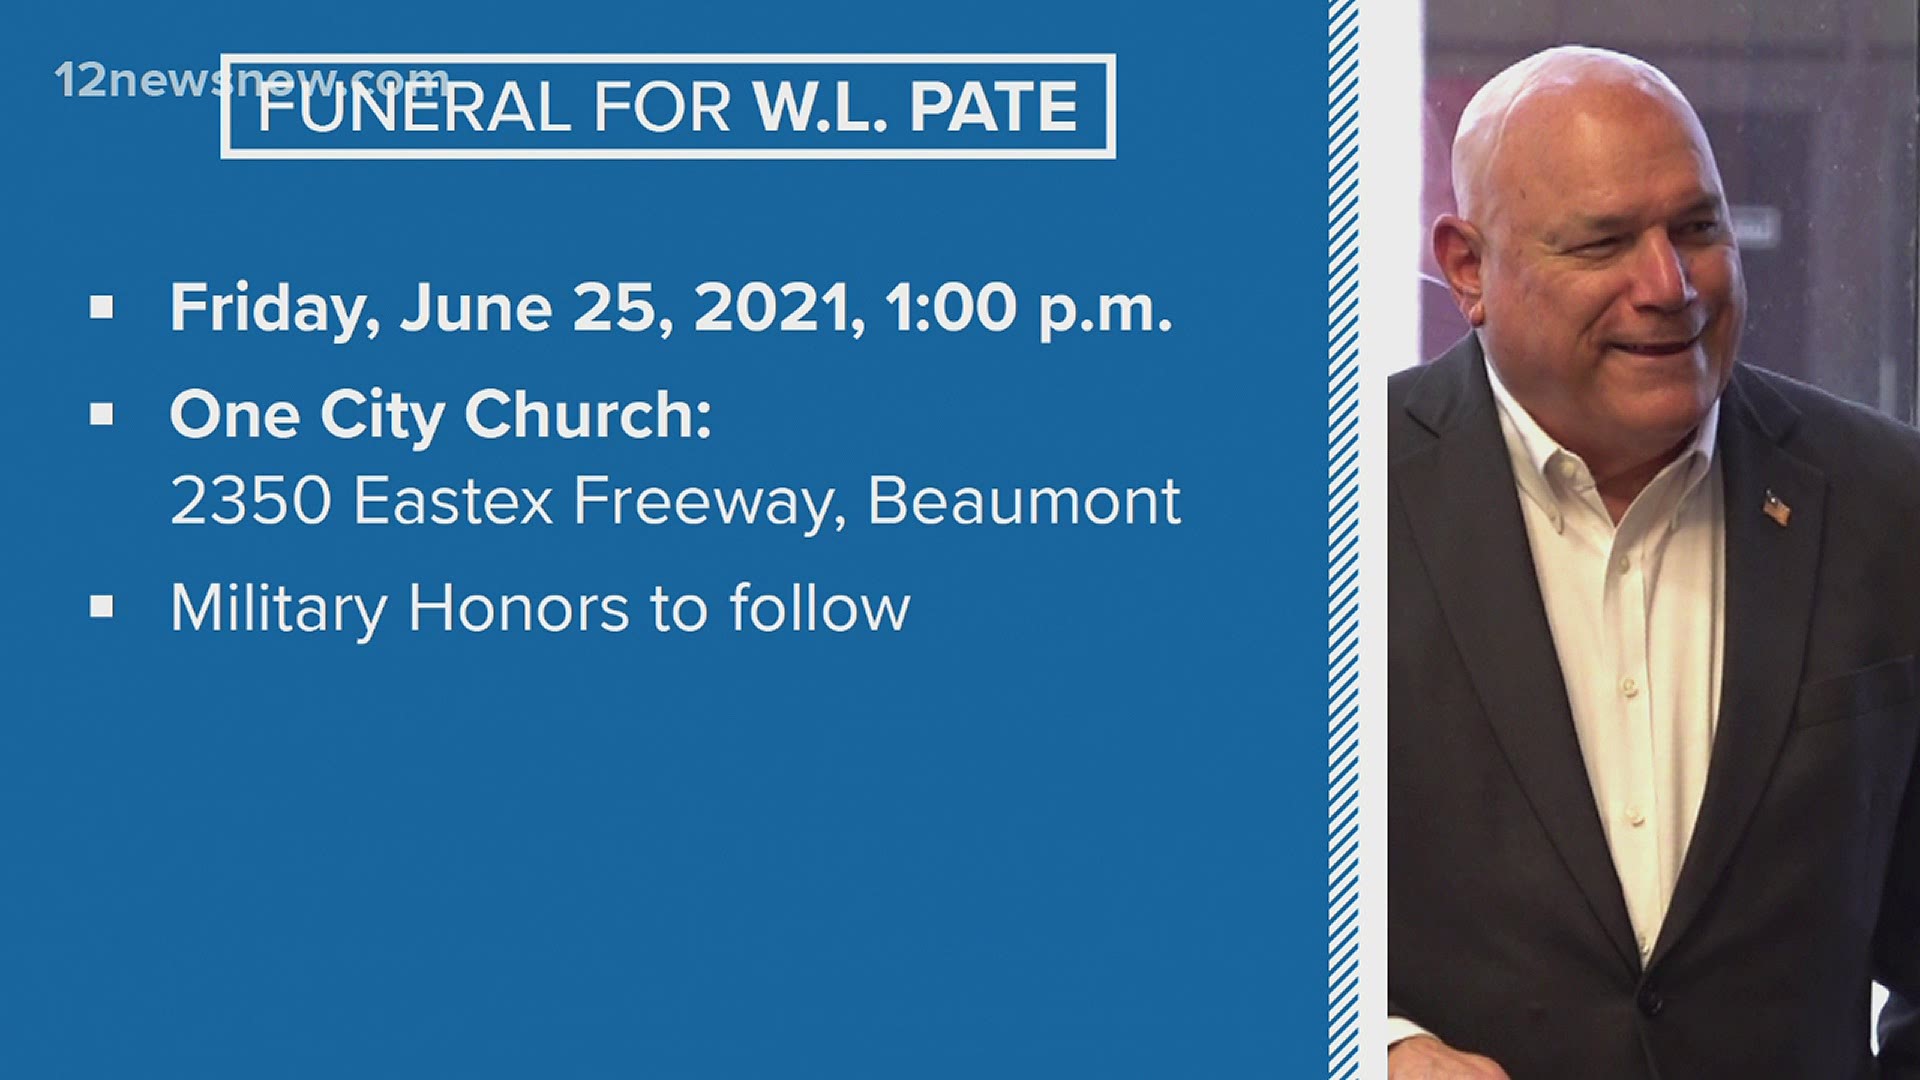 The funeral services will be held Friday, June 25, at 1 p.m., at the One City Church, on 2350 Eastex Freeway.